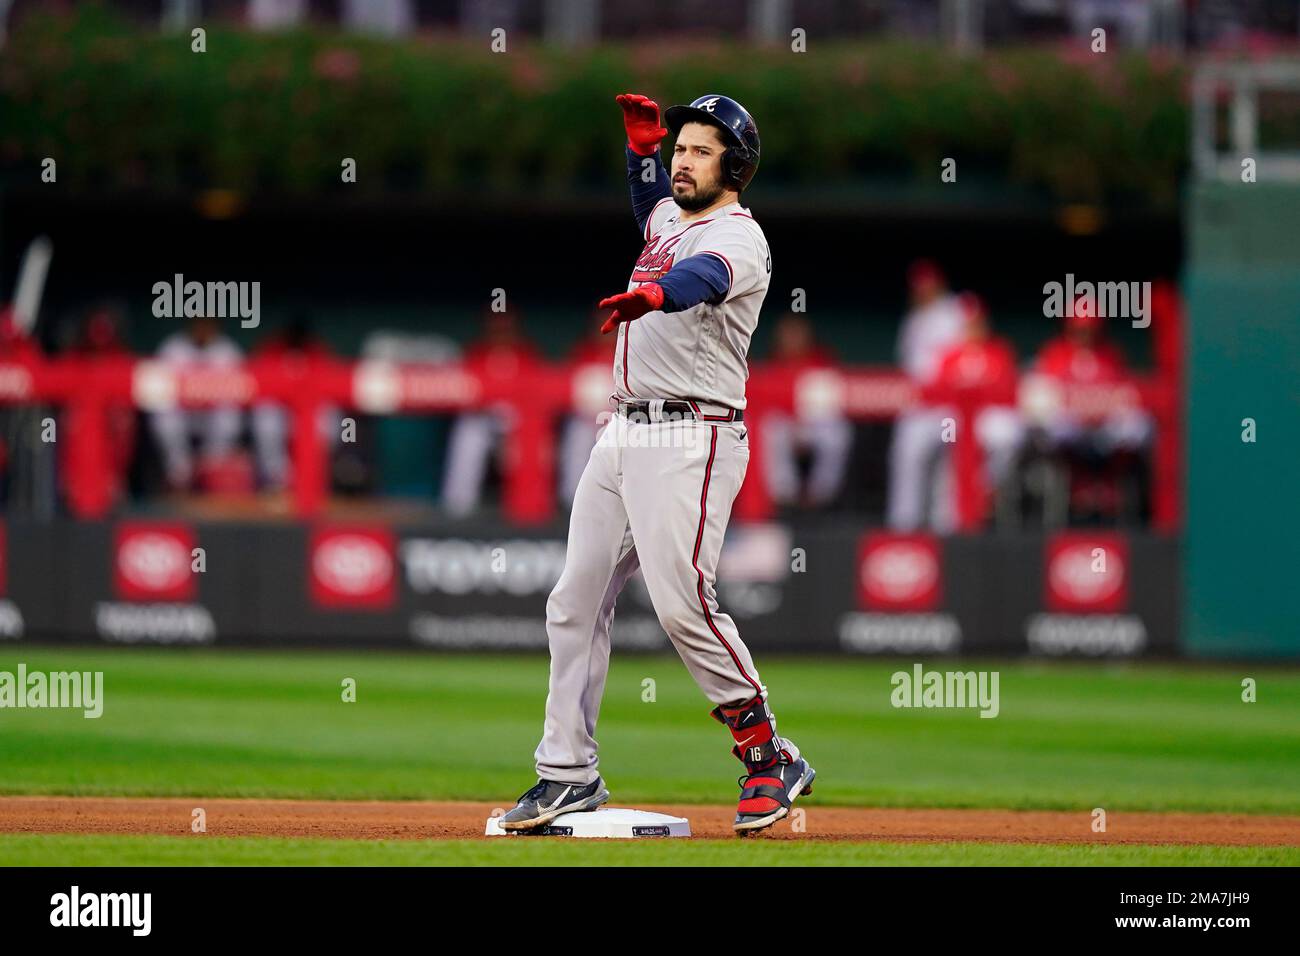 Travis d'Arnaud of the Atlanta Braves in action during a game against